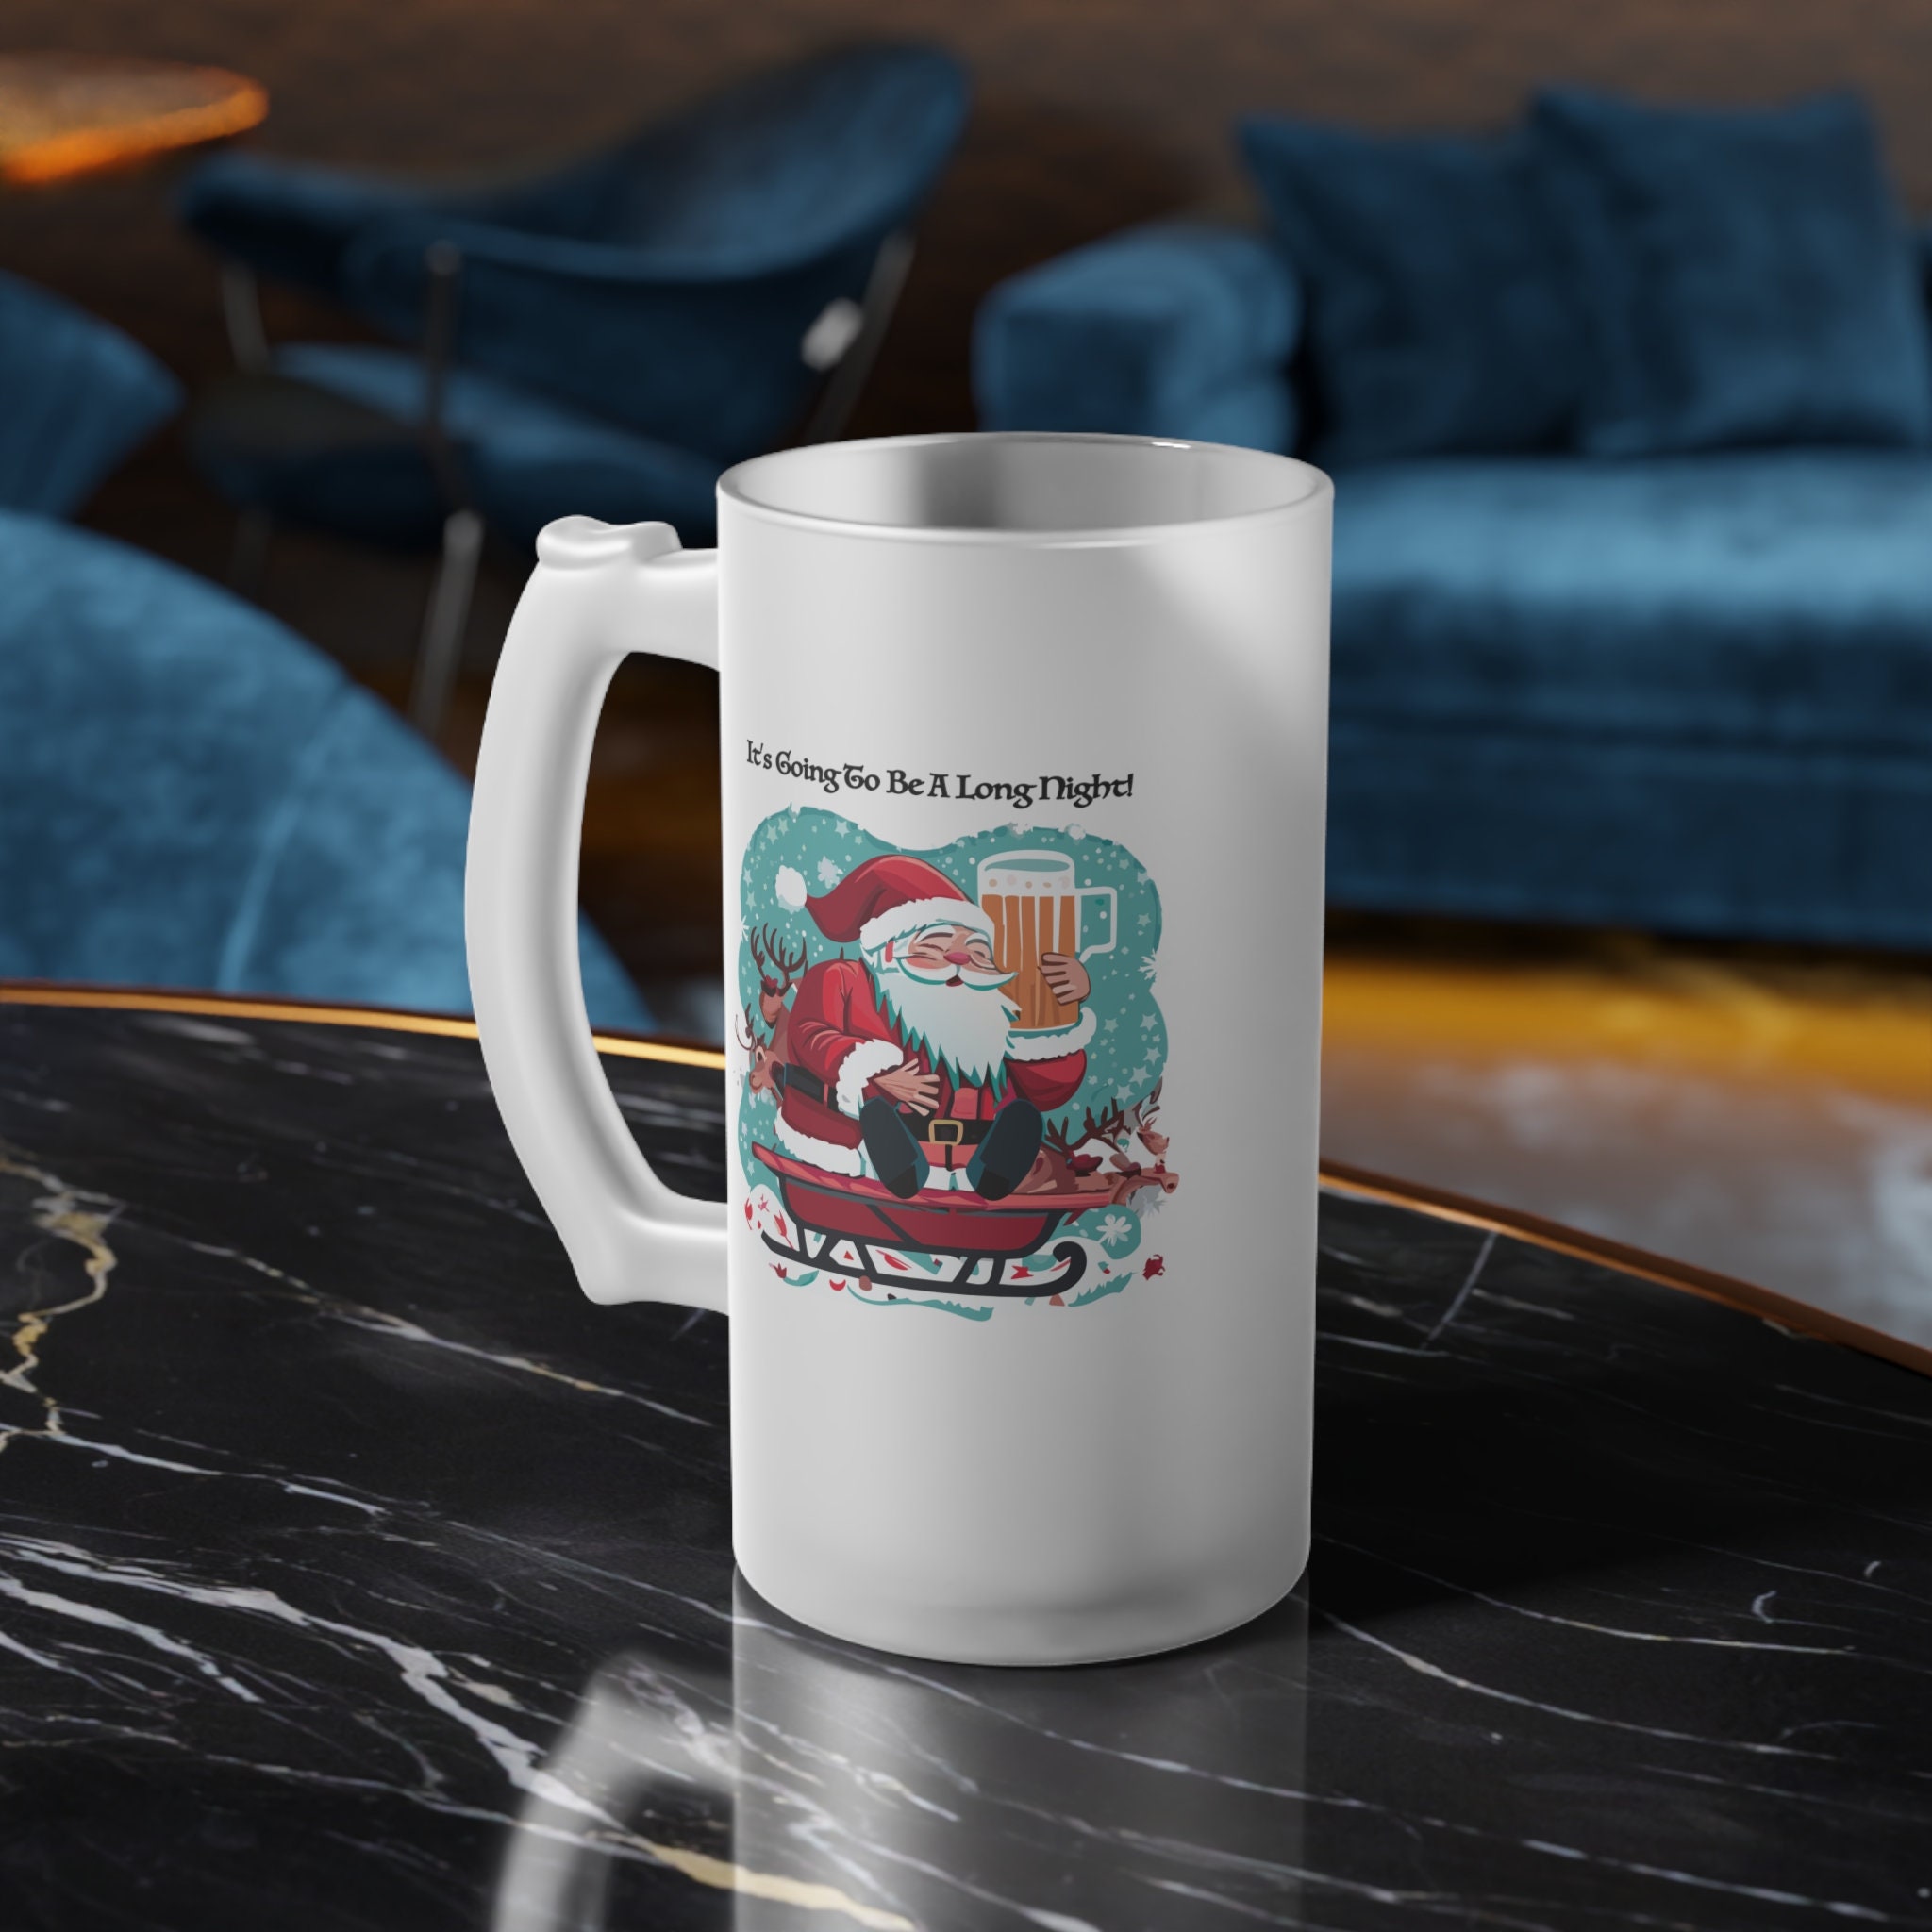 Vintage Christmas Movies and Chill Frosted Iced Coffee Cup for The Holidays - Tumbler with Lid and Straw from BluChi